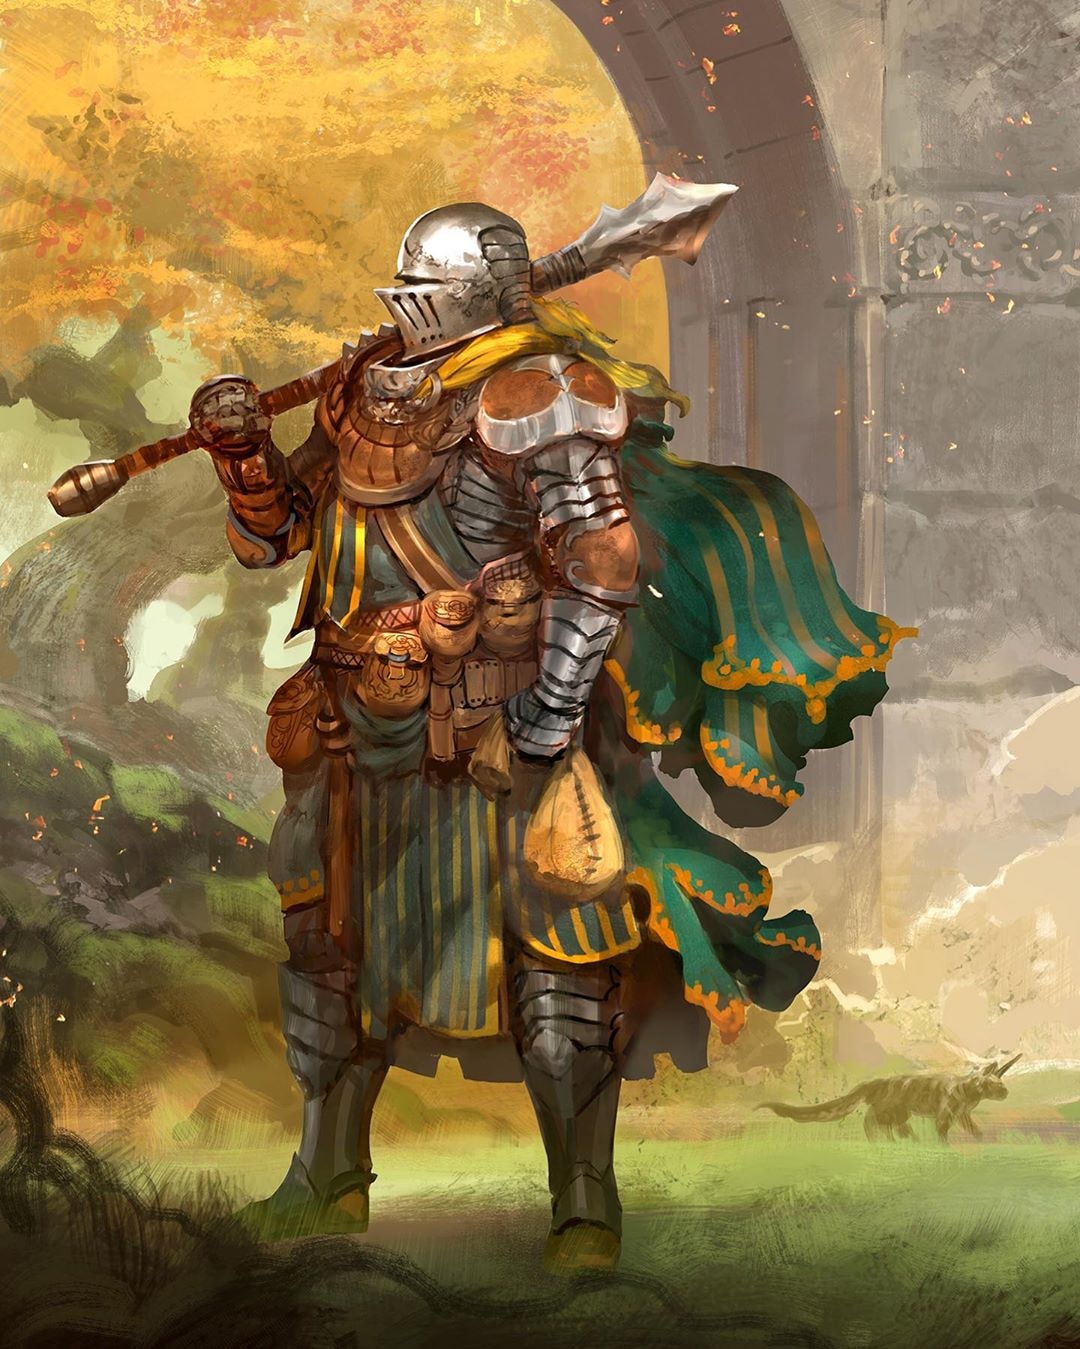 Do we have calcs for Silhouette Knights from Knight's & Magic?